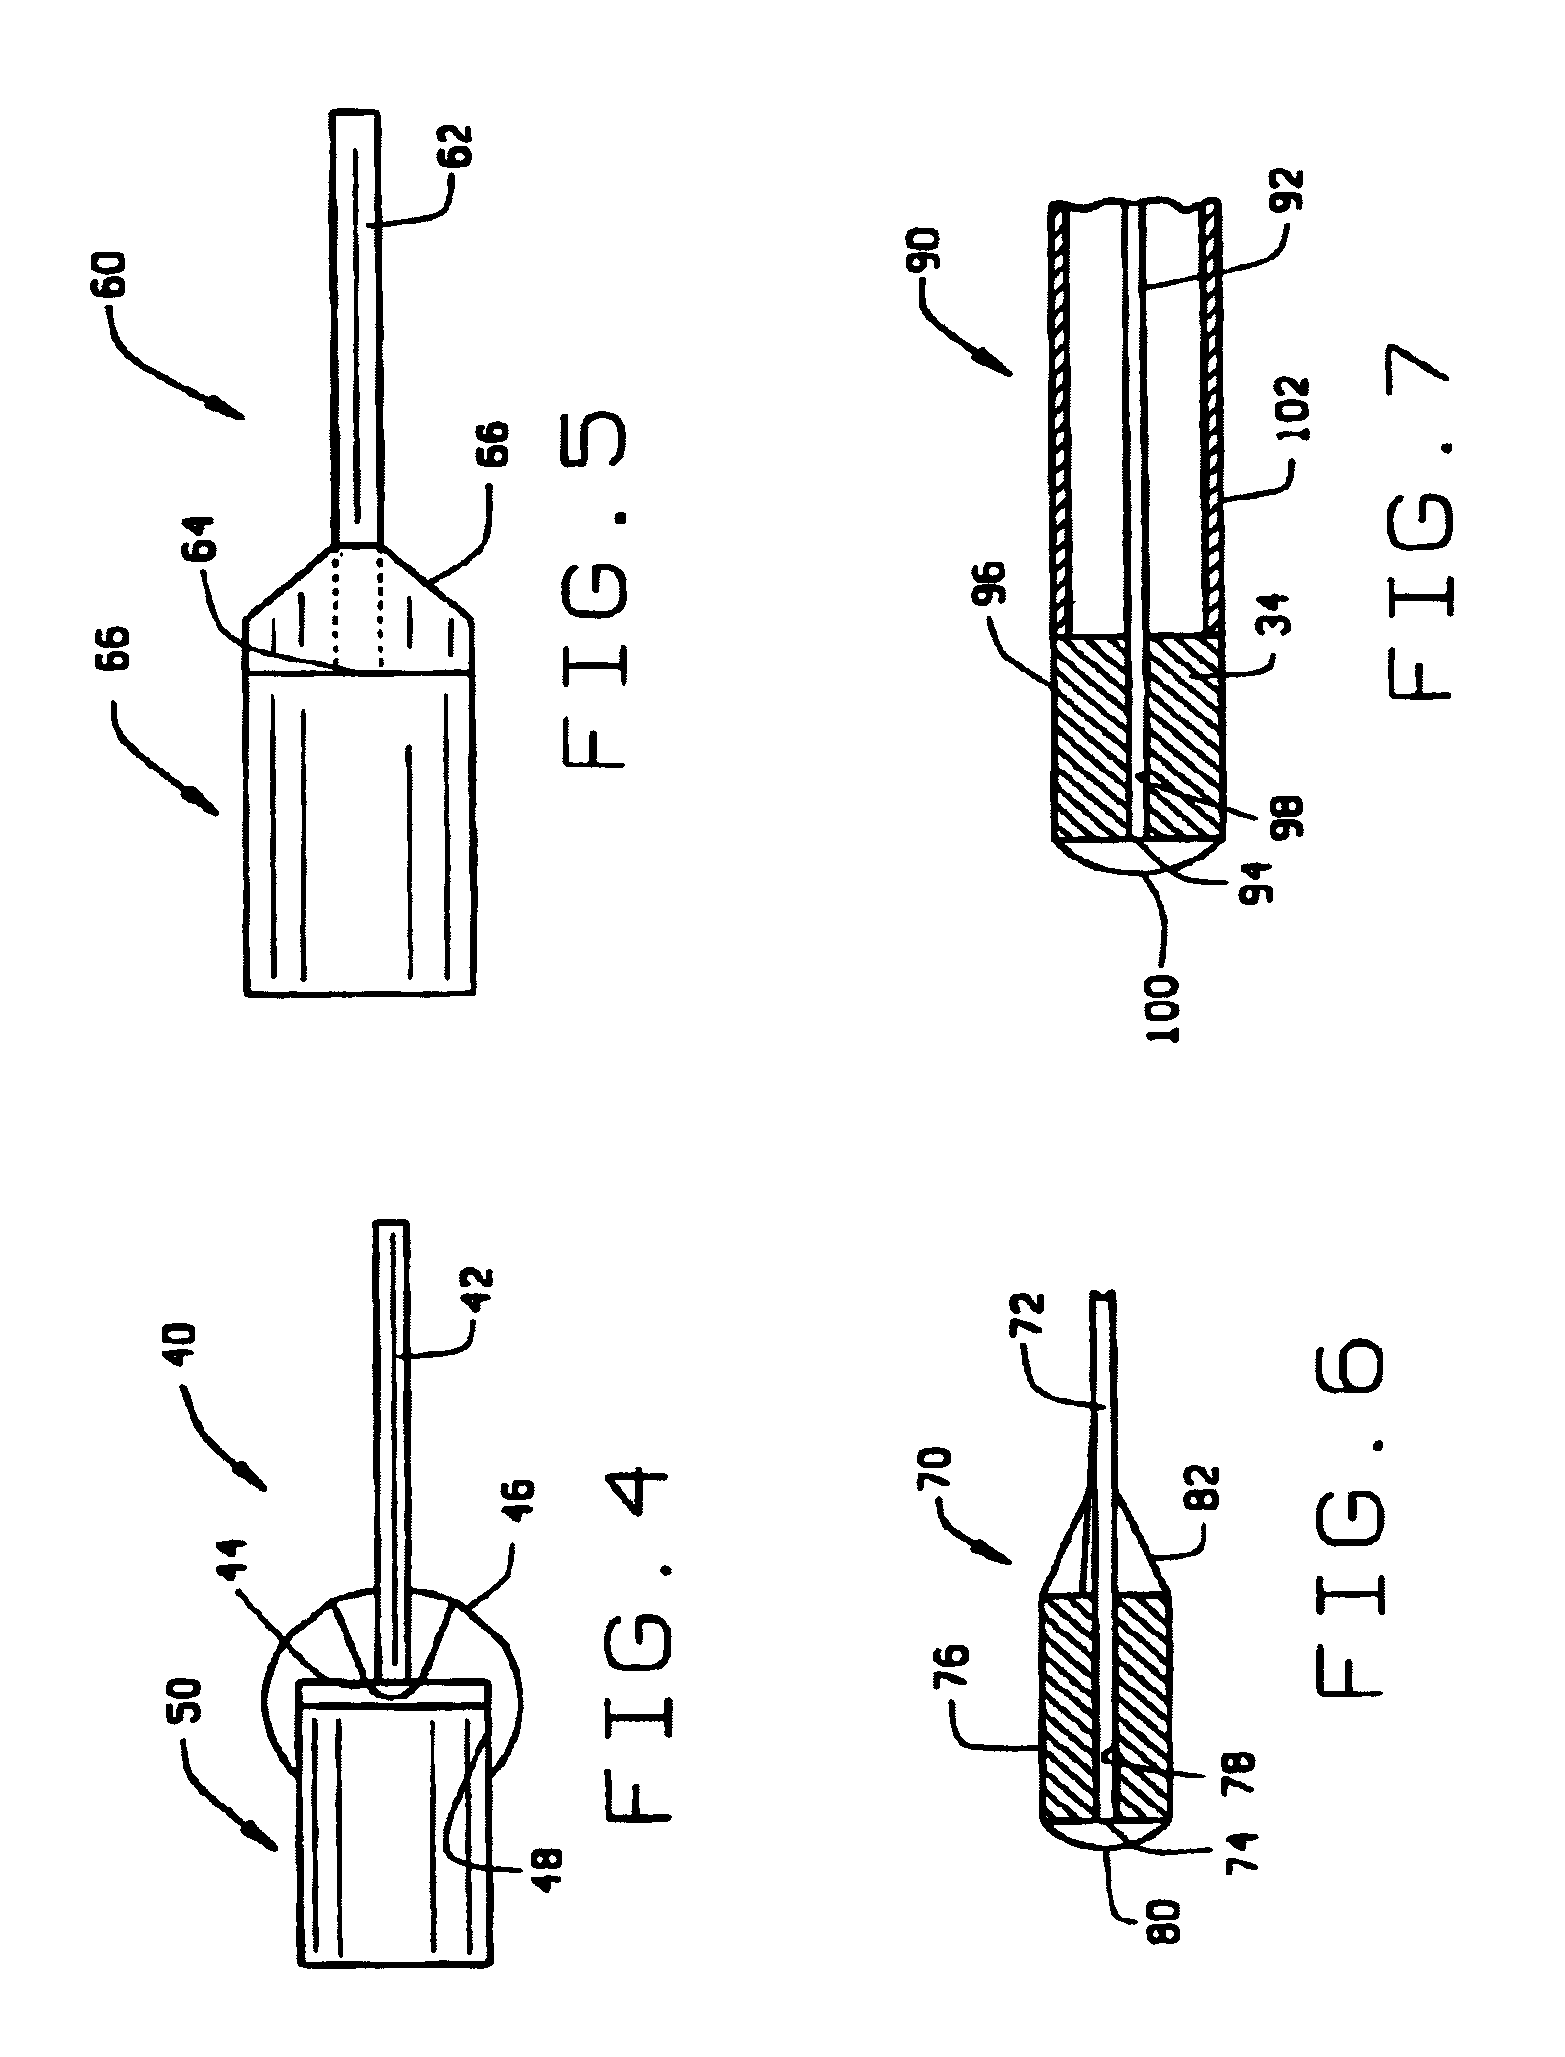 Method of and apparatus for navigating medical devices in body lumens by a guide wire with a magnetic tip